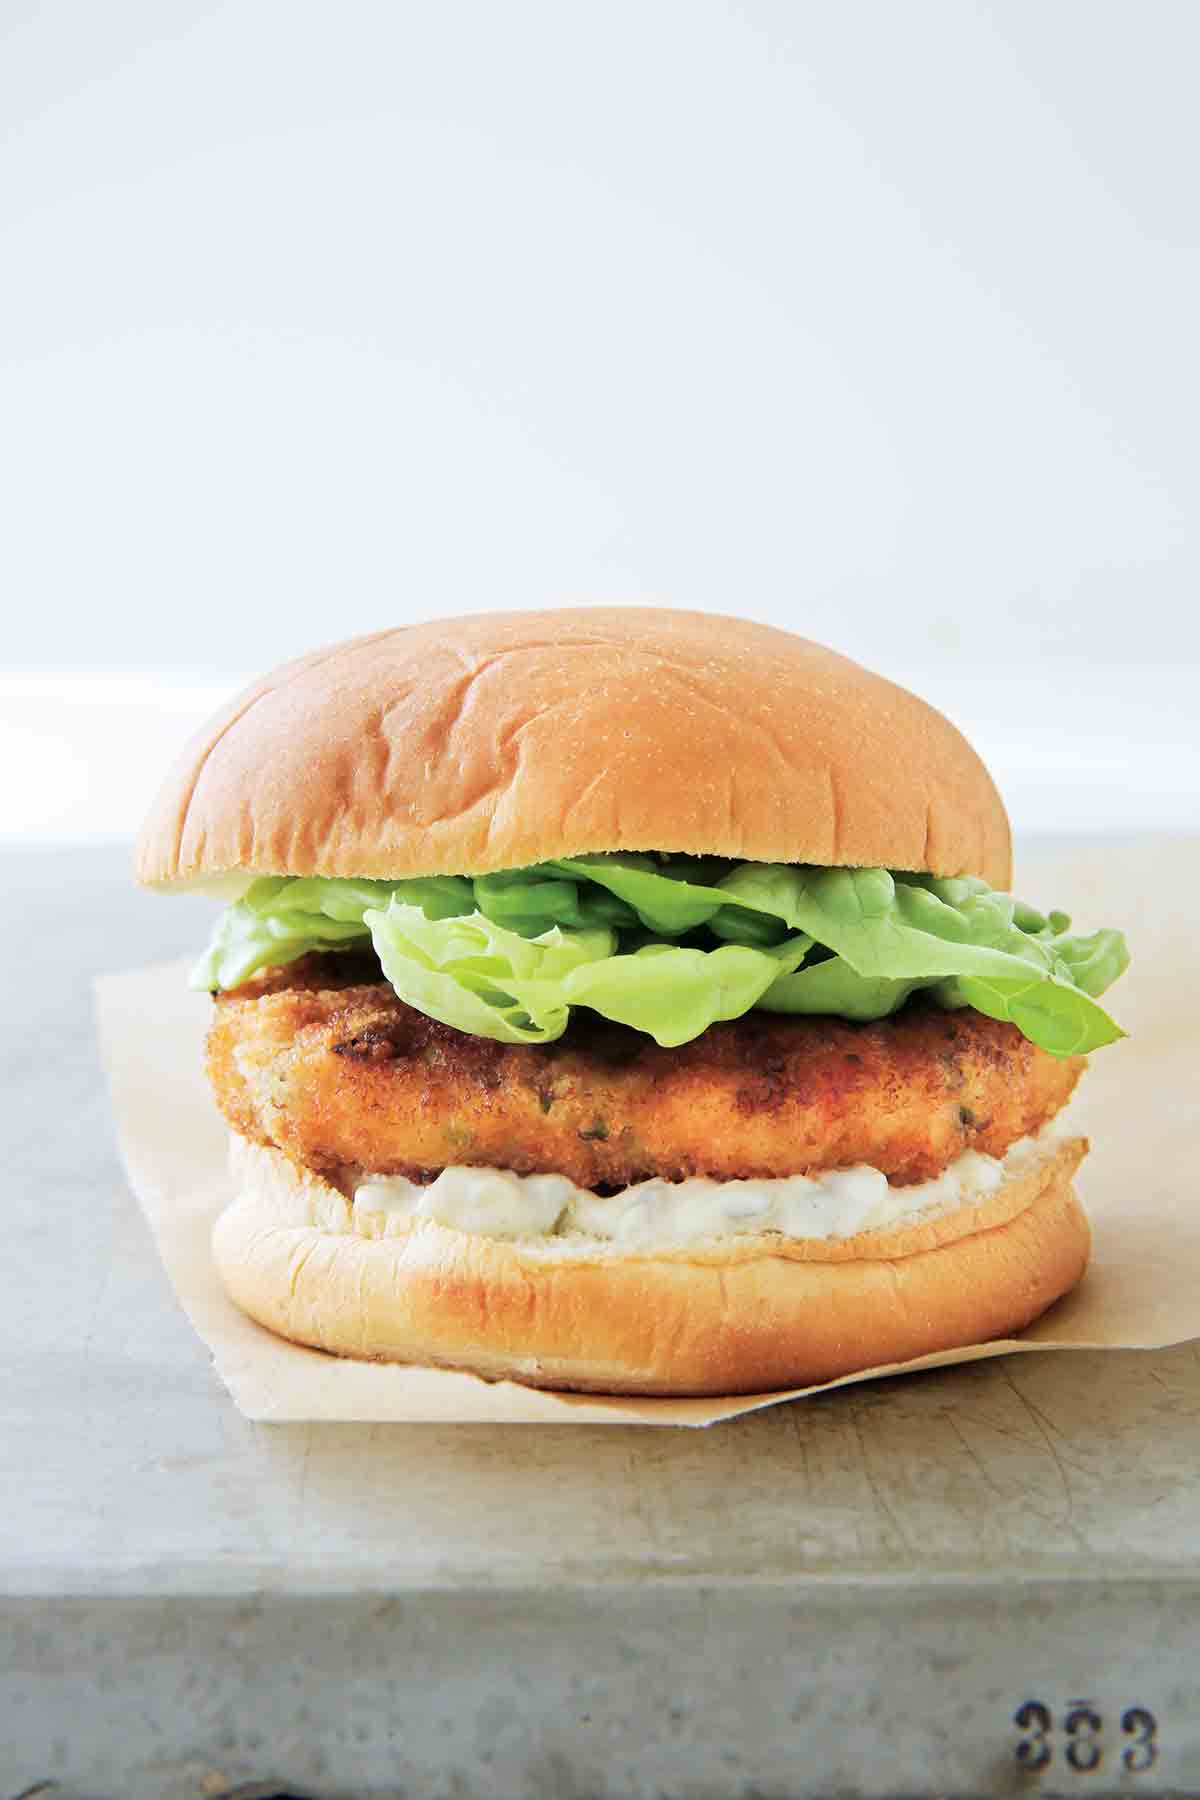 A shrimp burger with tartar sauce, topped with lettuce in a white bun on a piece of parchment paper.